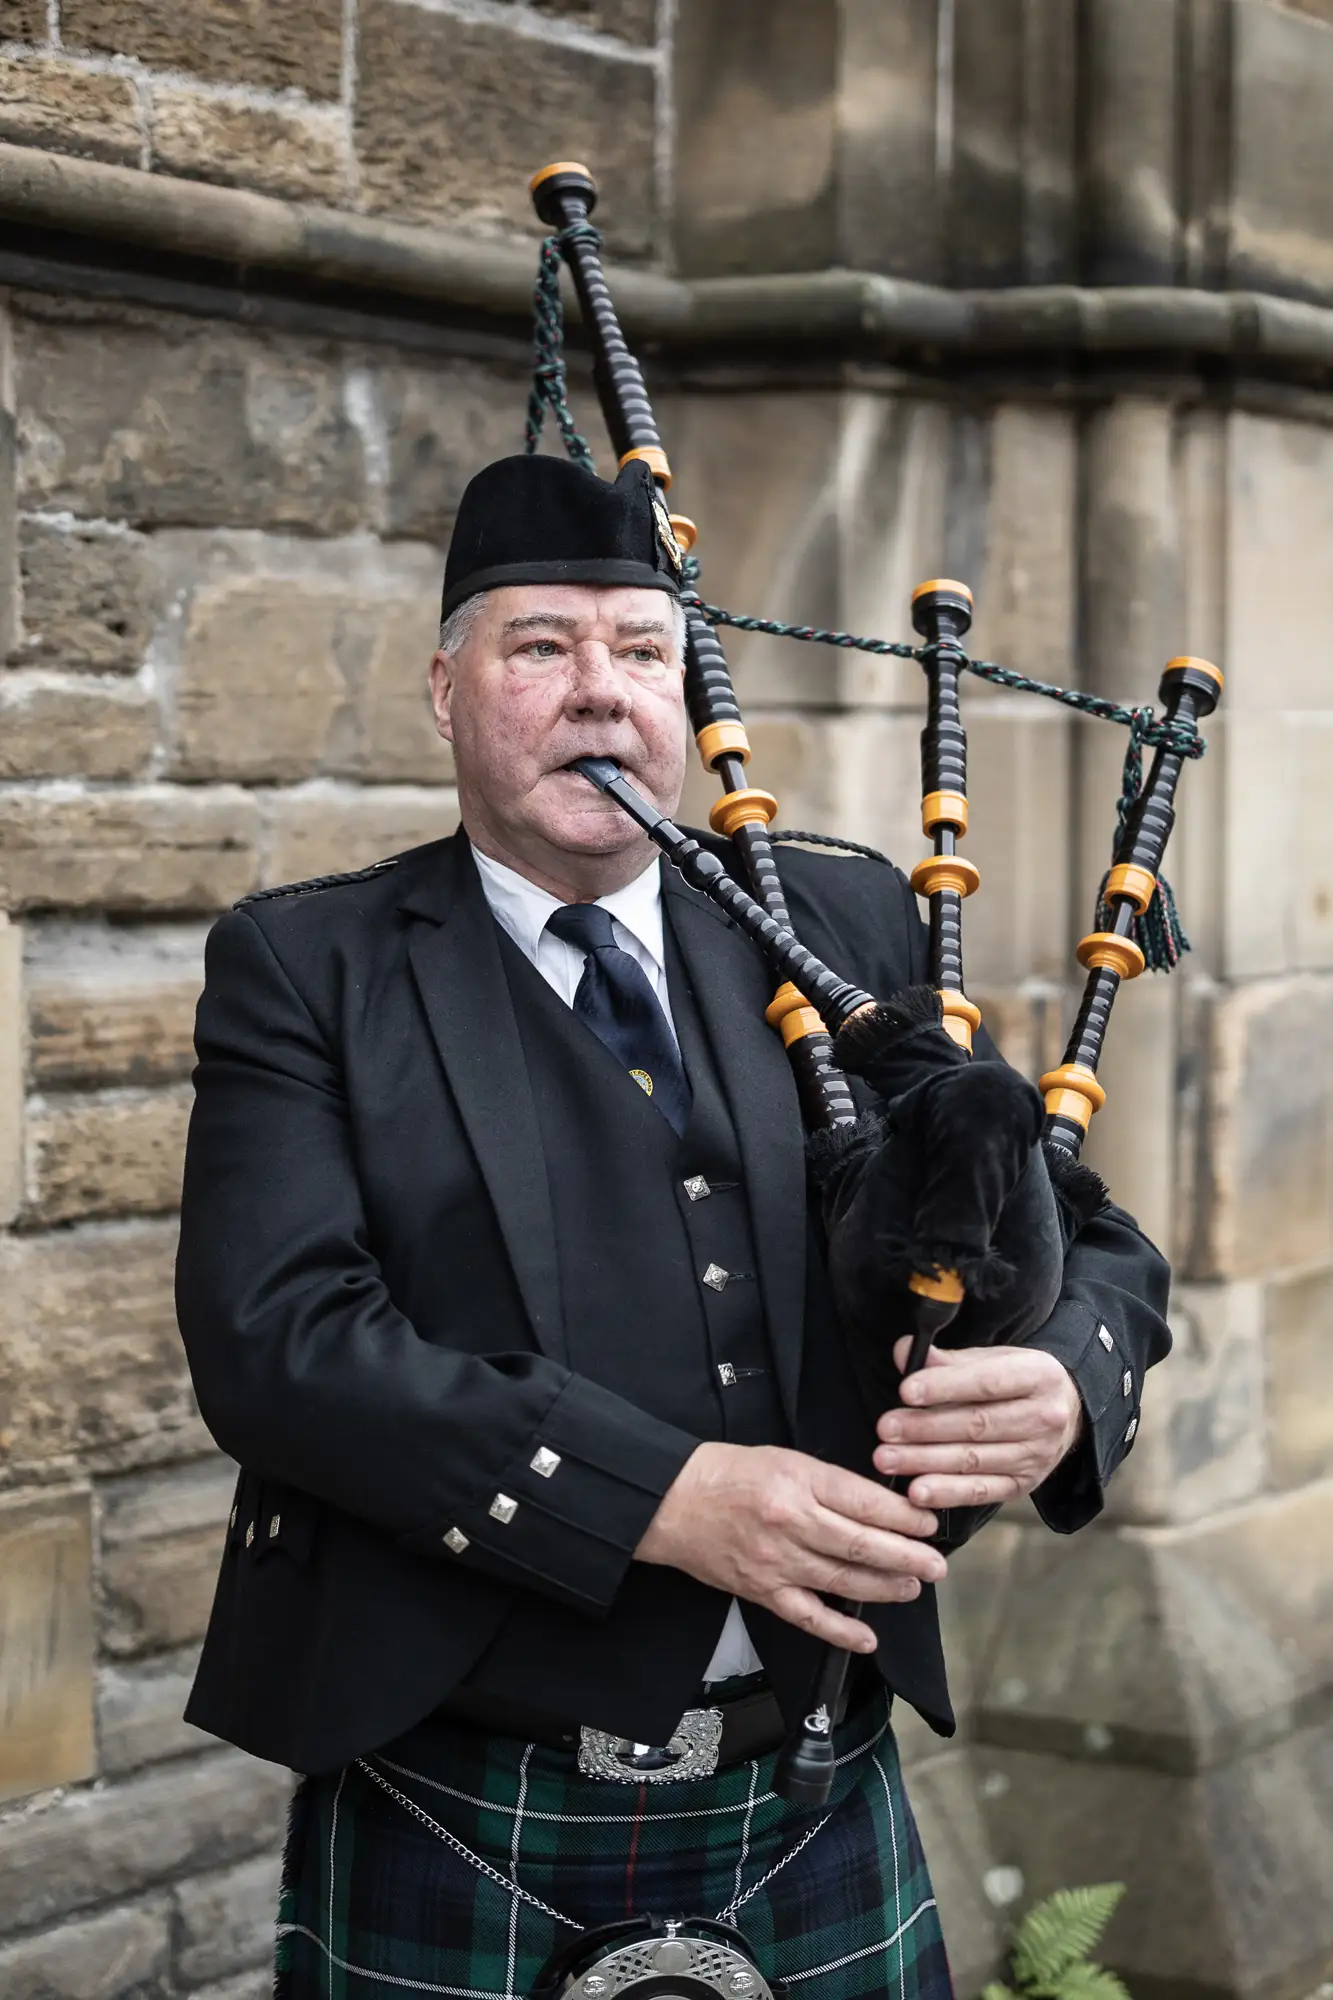 A man in traditional scottish attire playing the bagpipes outdoors, featuring a tartan kilt and a balmoral bonnet.